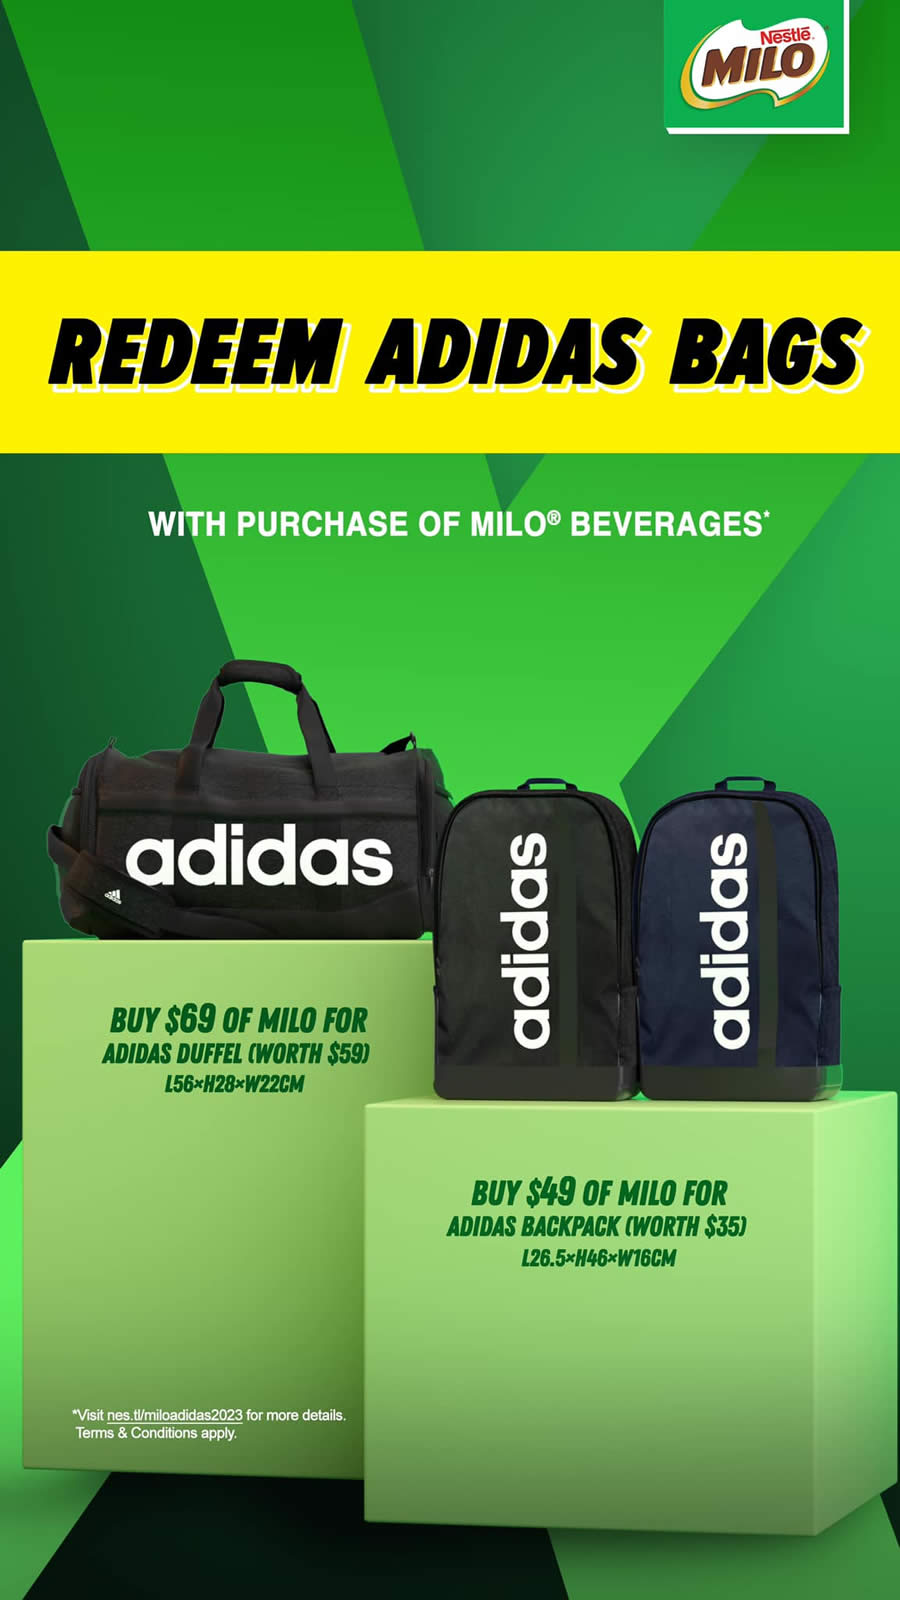 Milo S’pore giving away free Adidas bags when you spend min $49 on ...